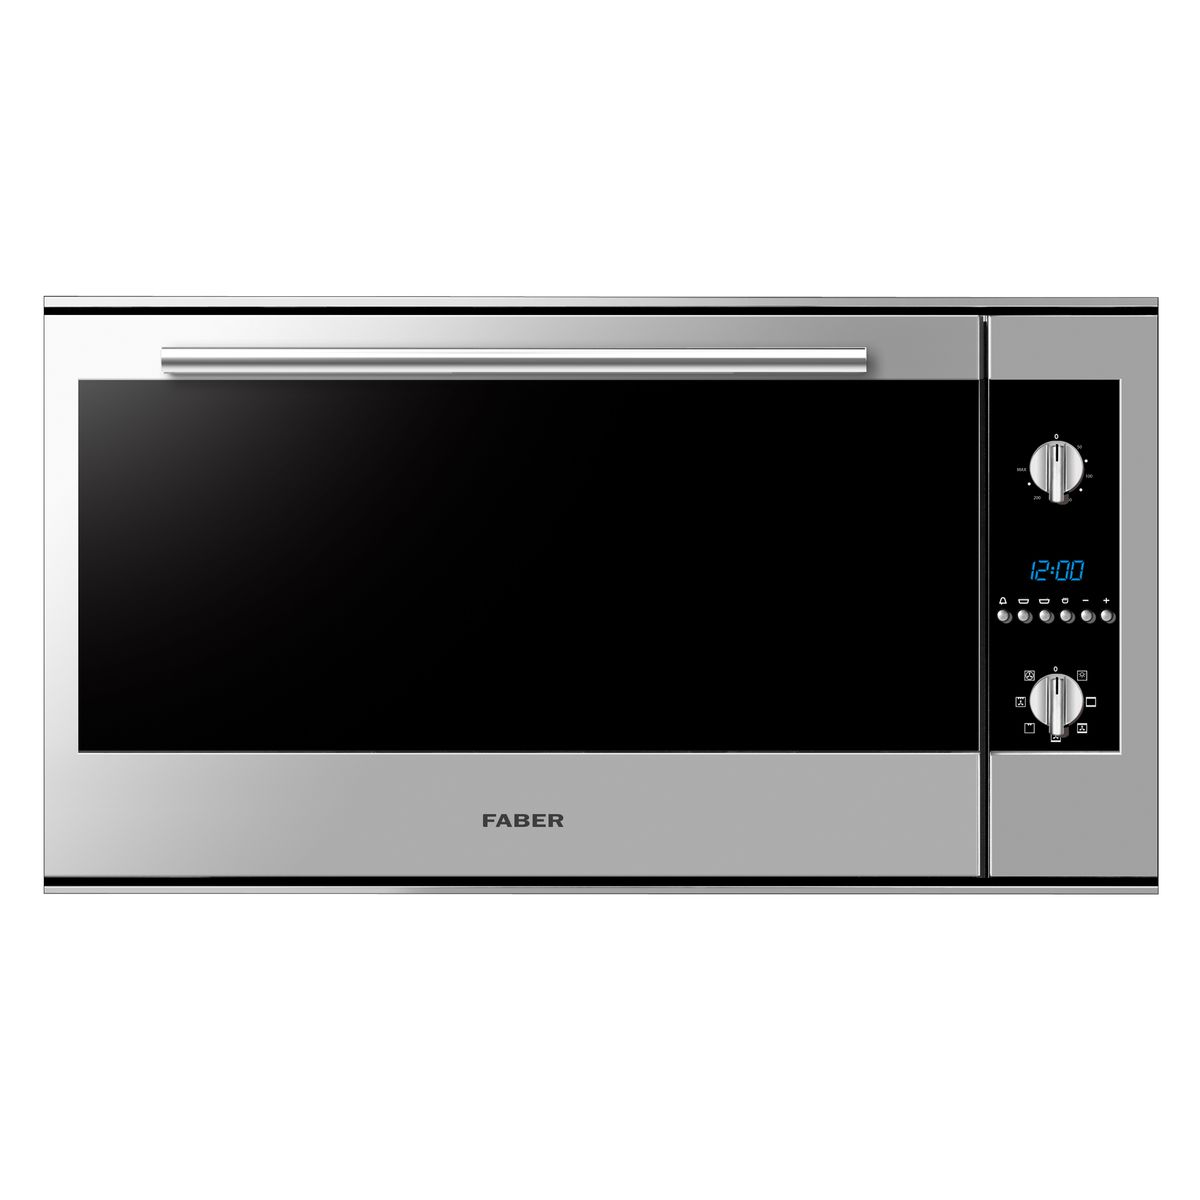 Faber - 90cm Multifunctional Electric Oven